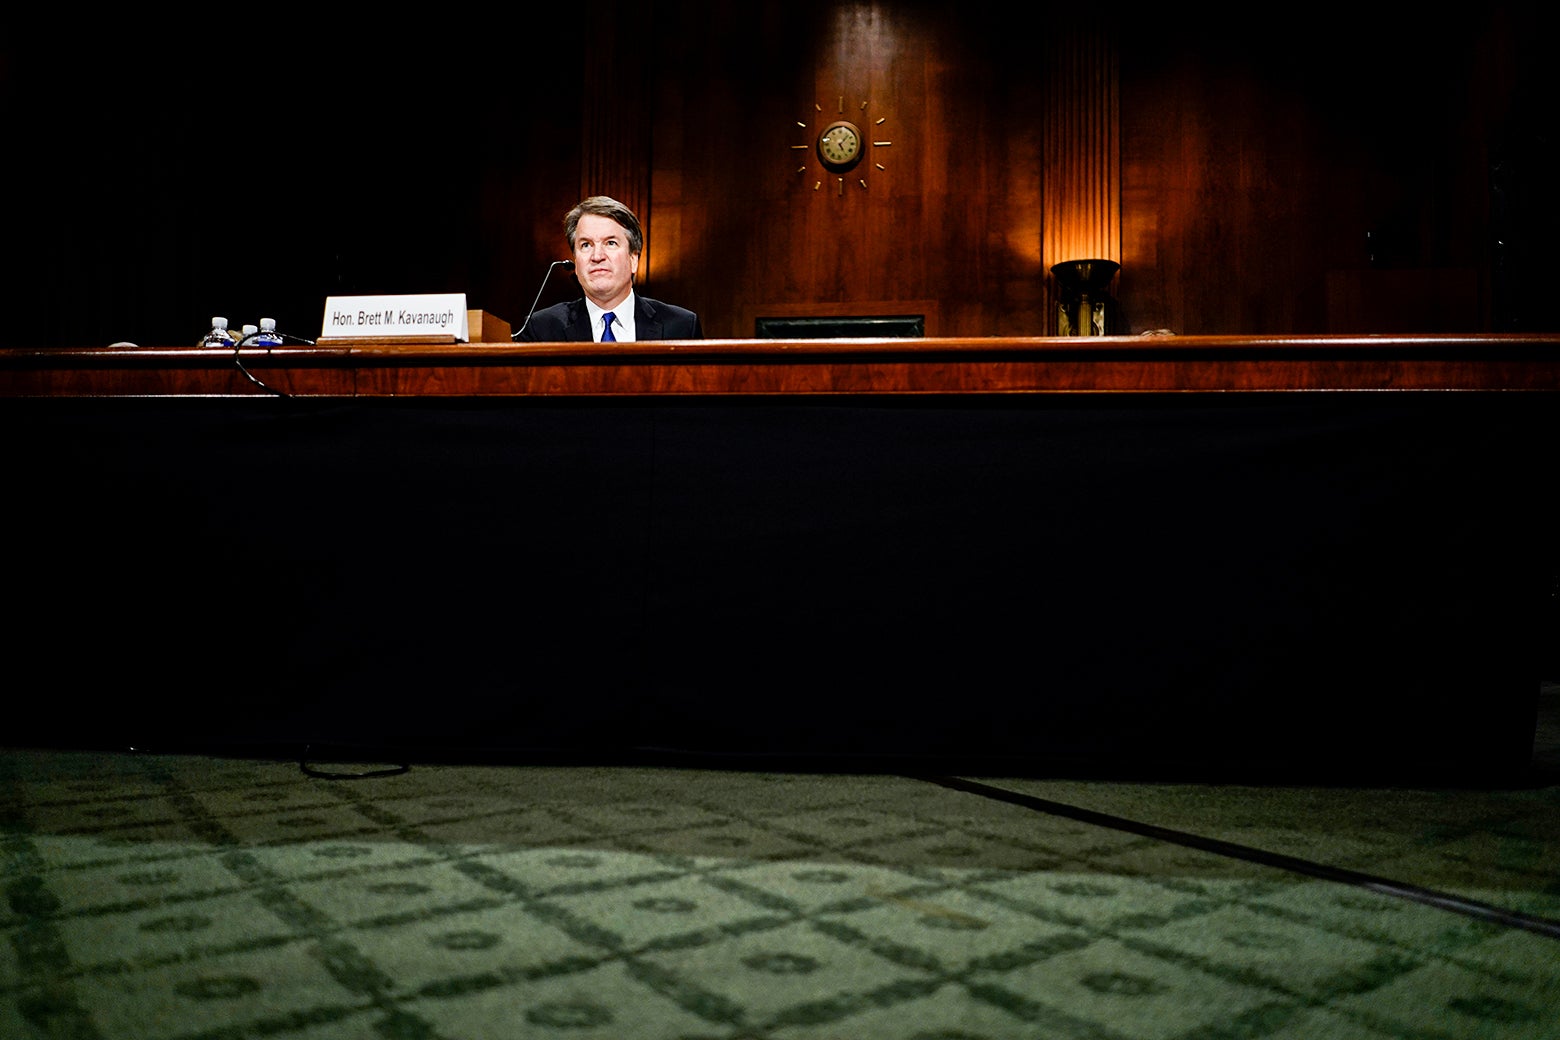 Kavanaugh seated for questioning.